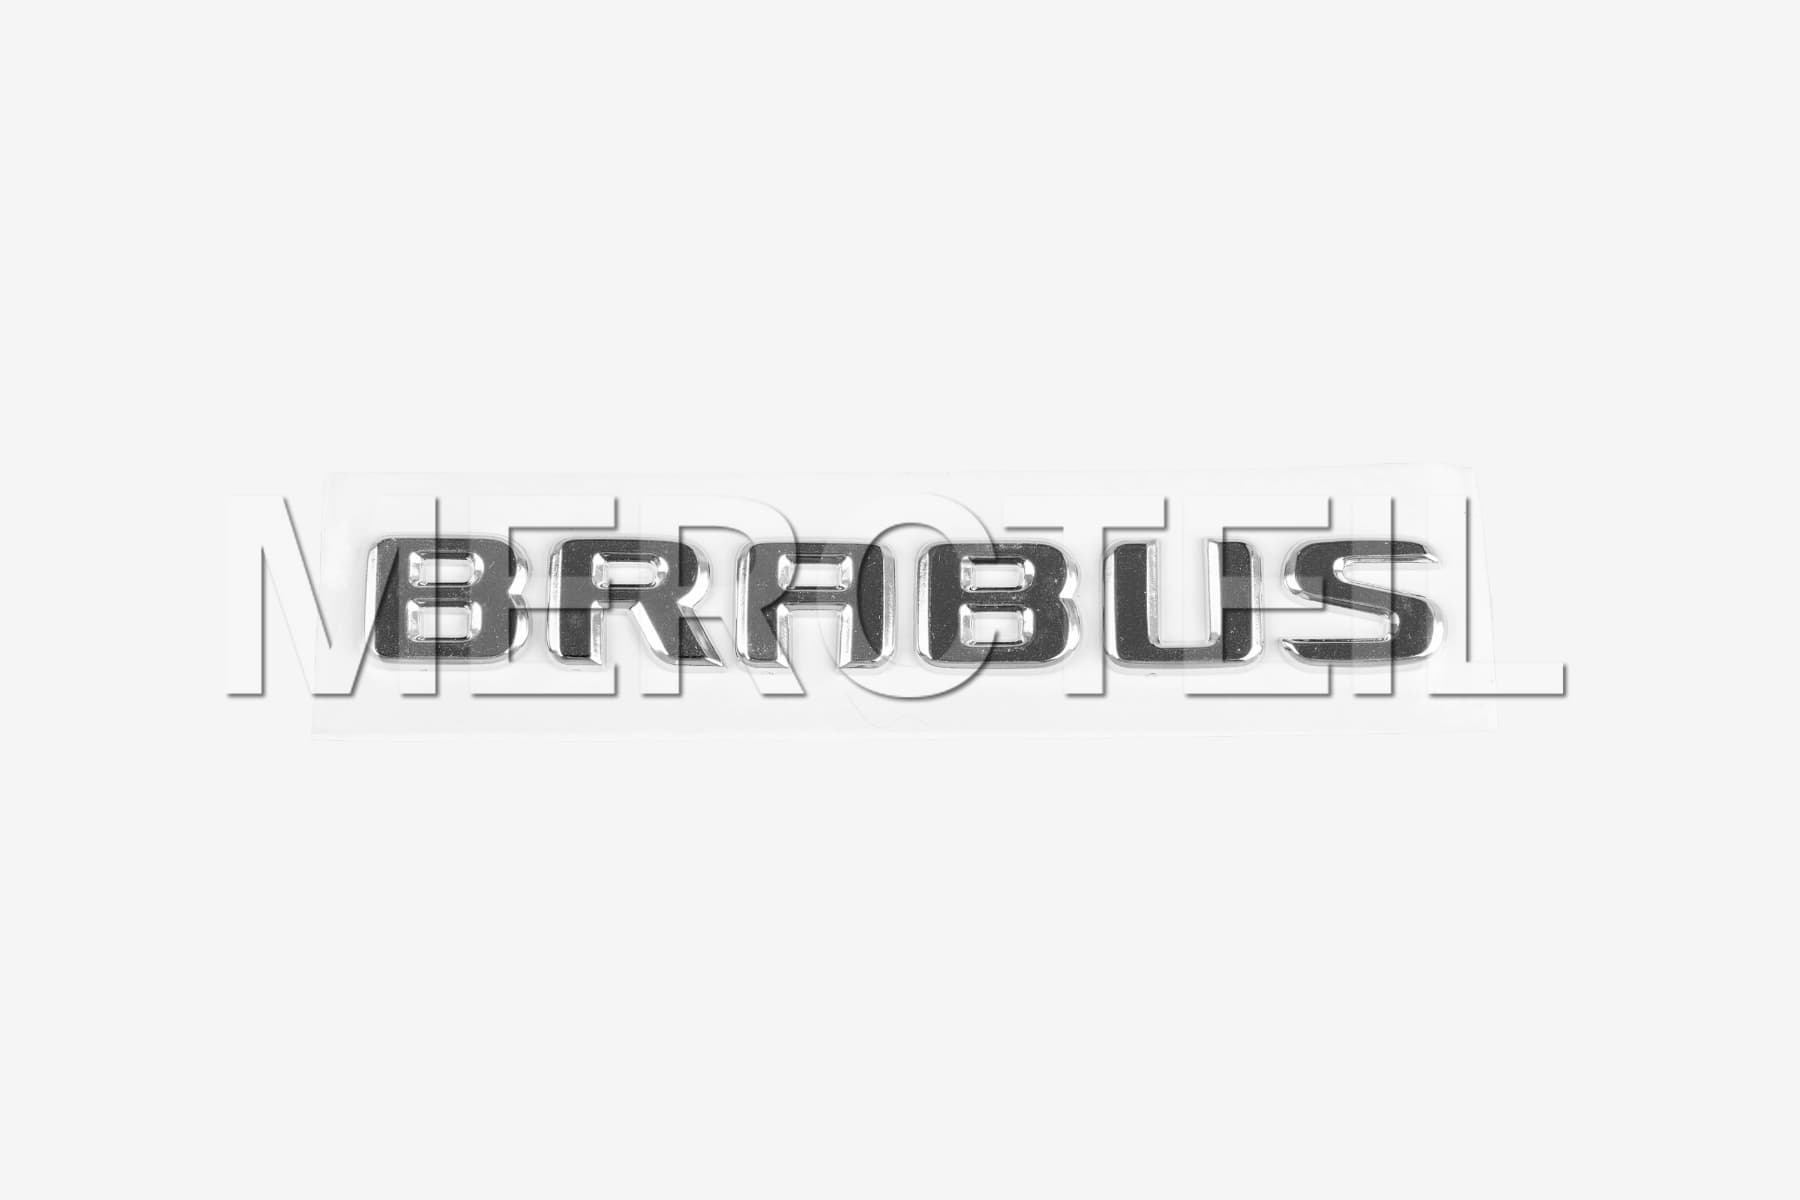 BRABUS Genuine Rear Badge Logo for Boot Lid/Tailgate (Part number: 211-000-14)